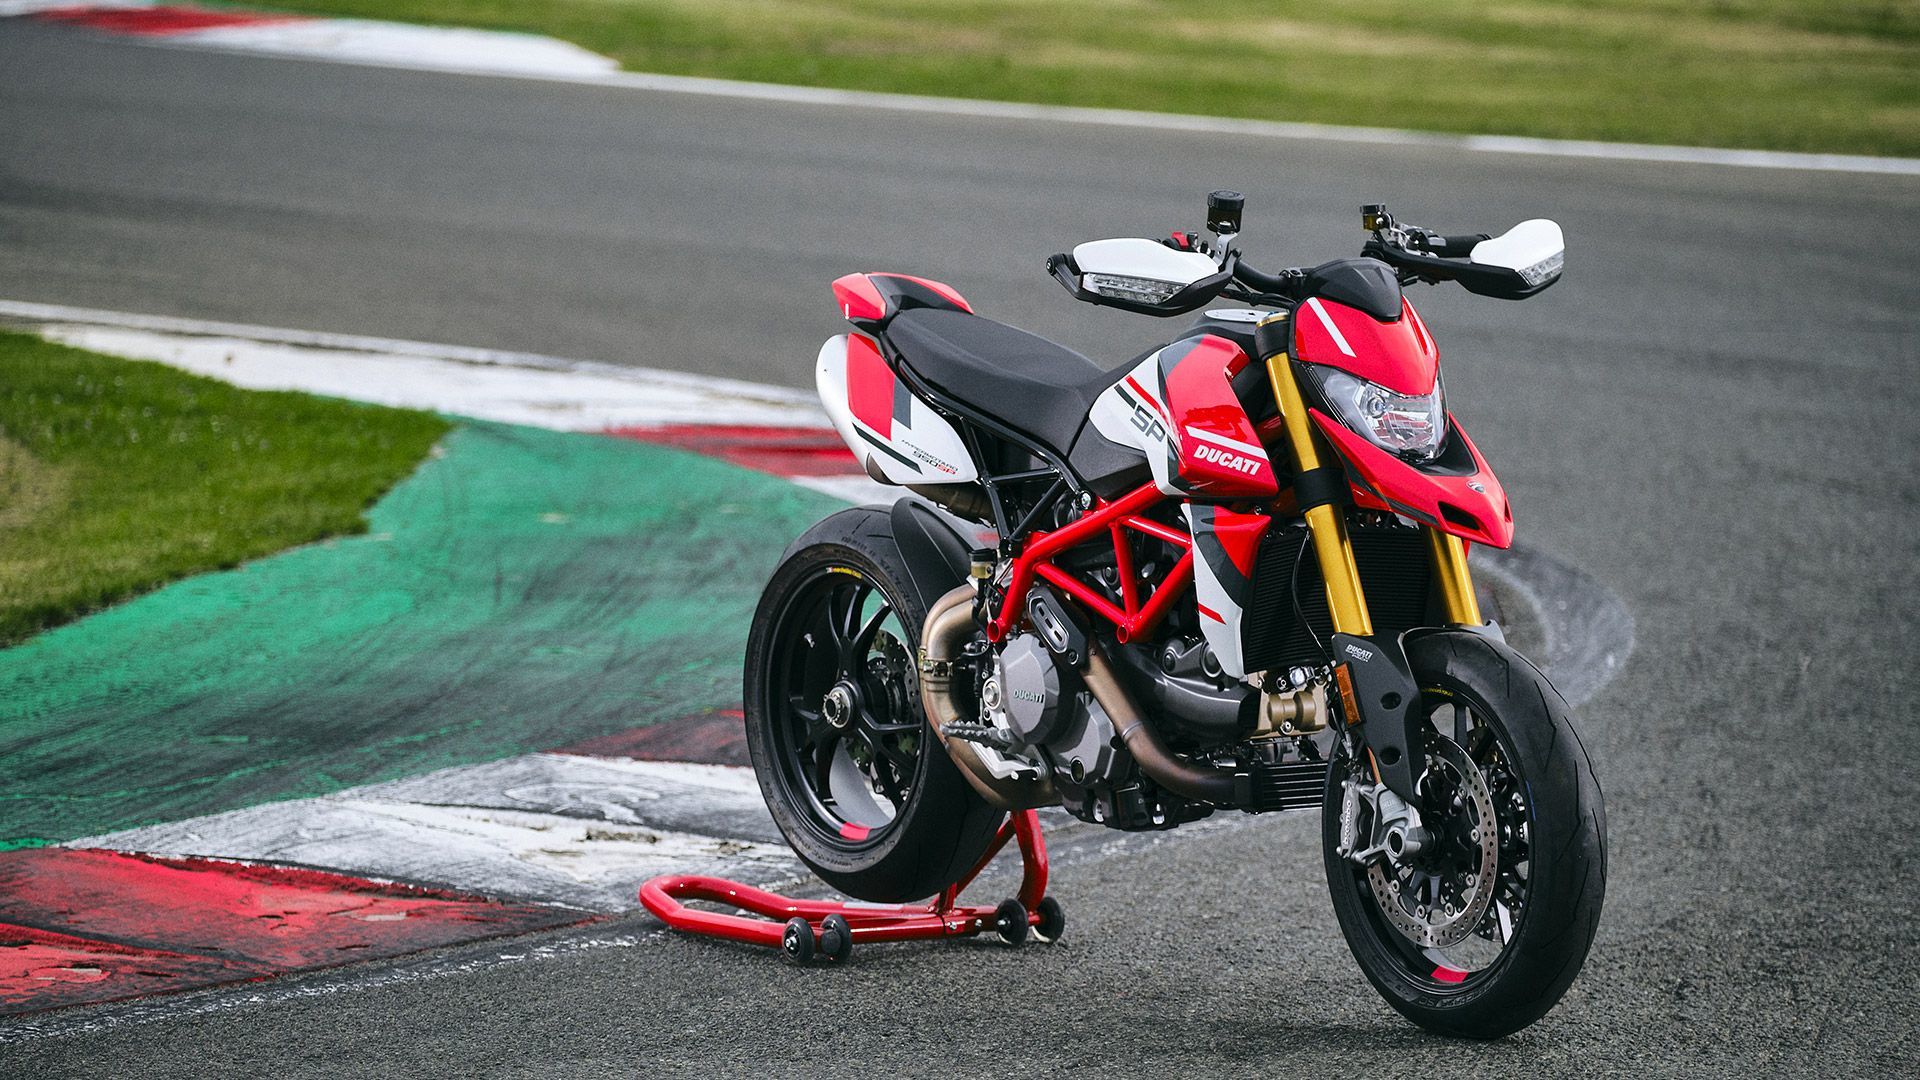 The Most Impressive Features of the 2023 Ducati Hypermotard